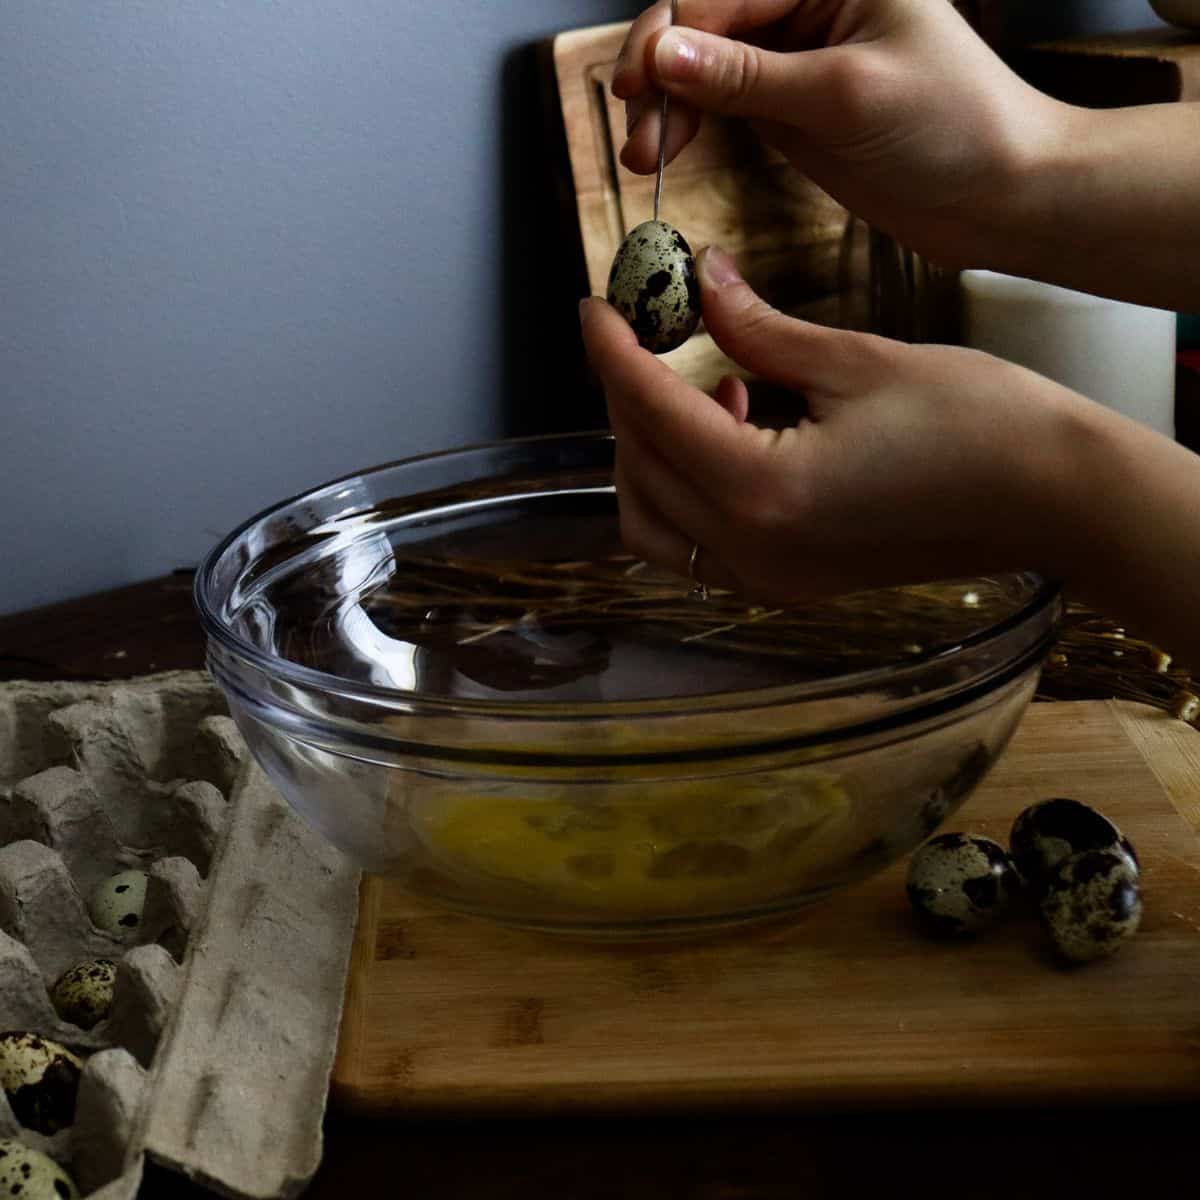 poking a hole in the top of a quail egg with a needle